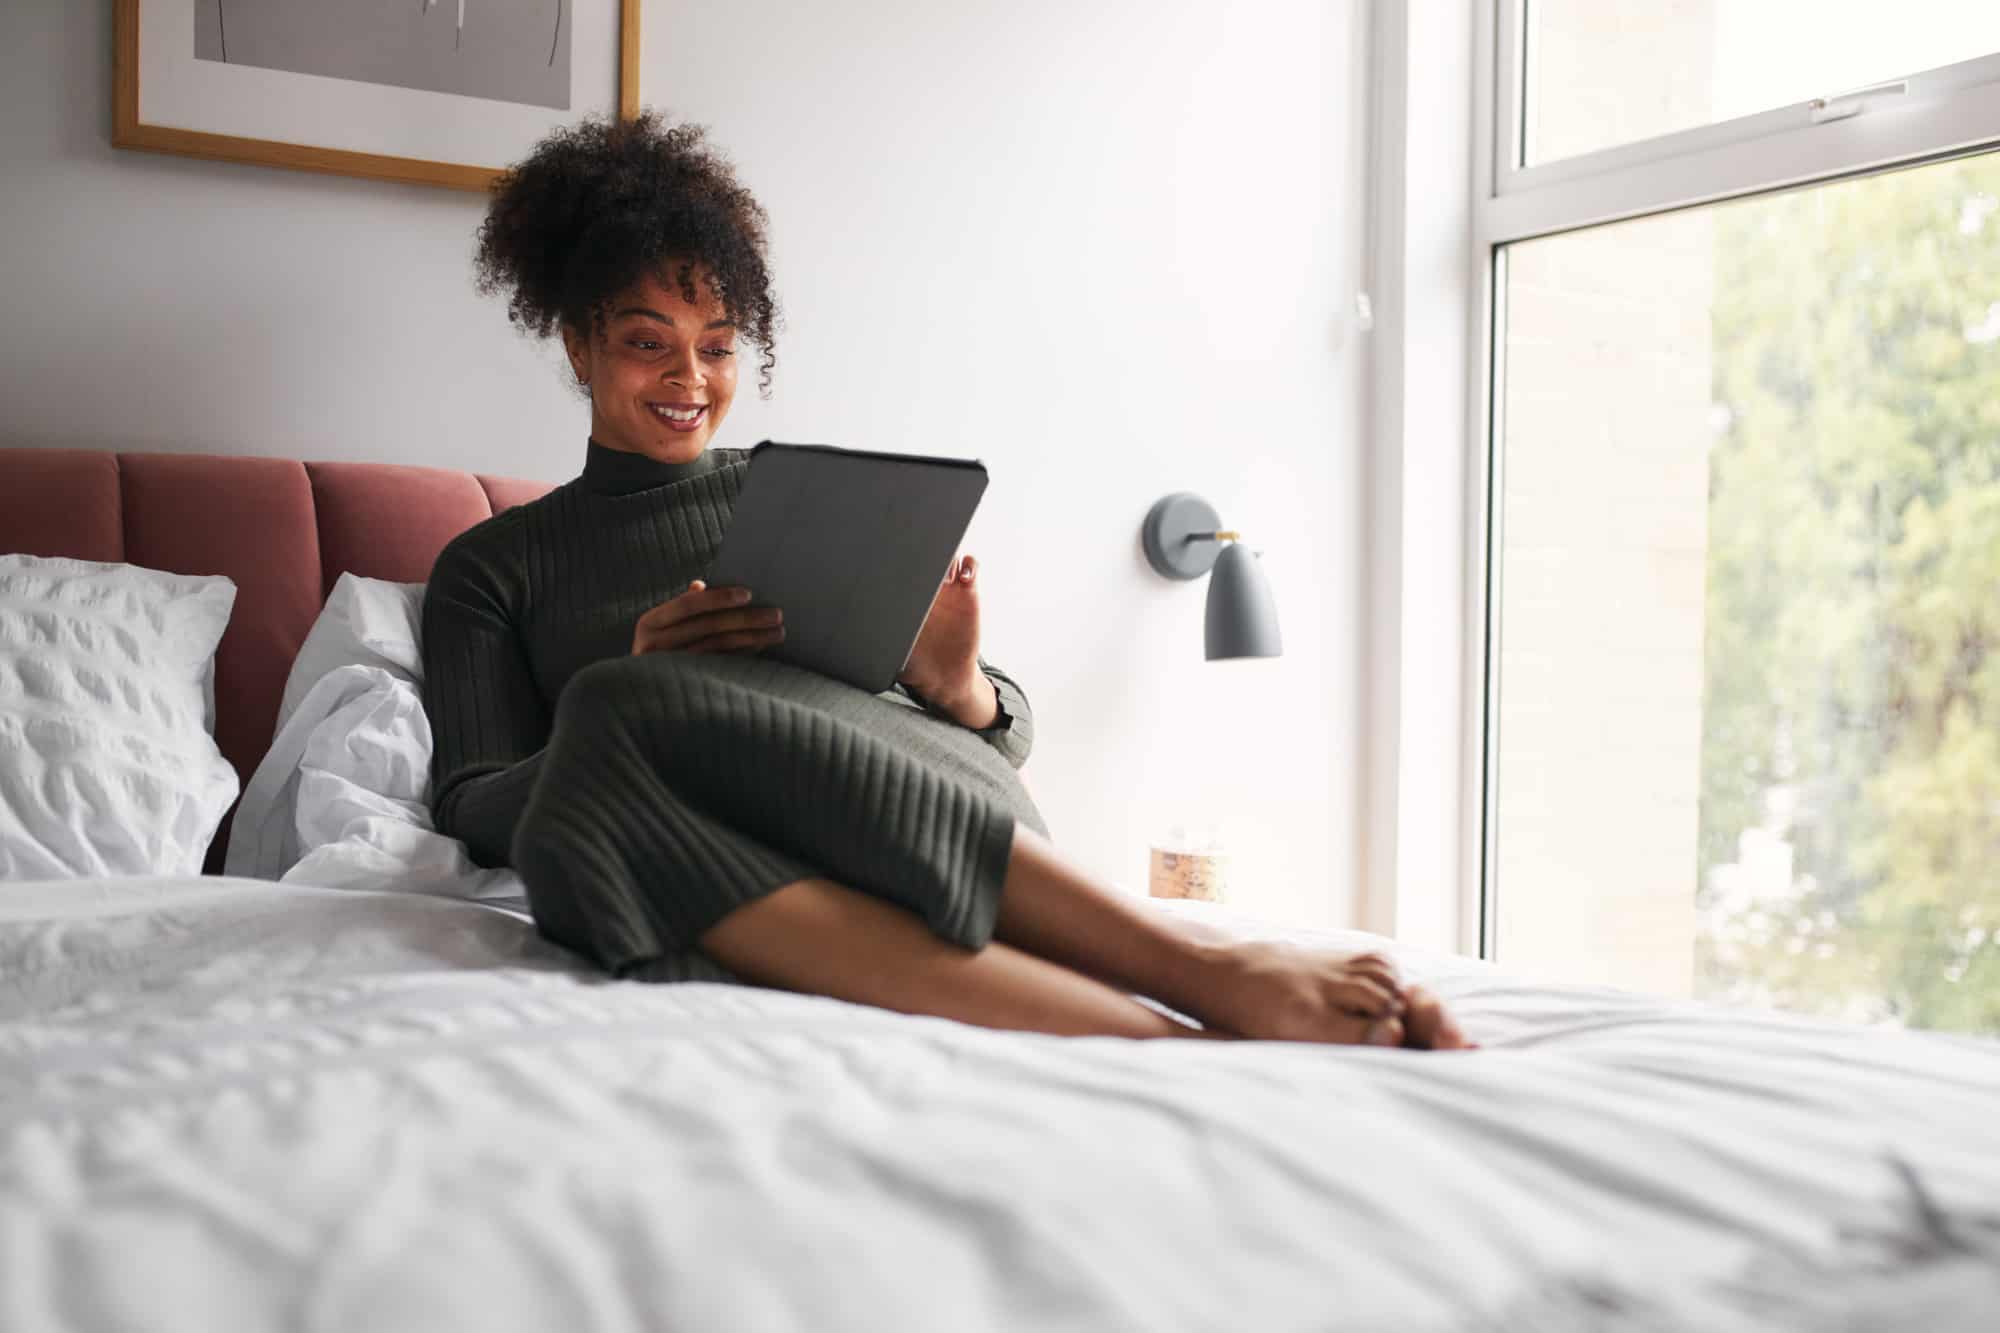 Woman reading ebooks on a tablet while siting on her bed